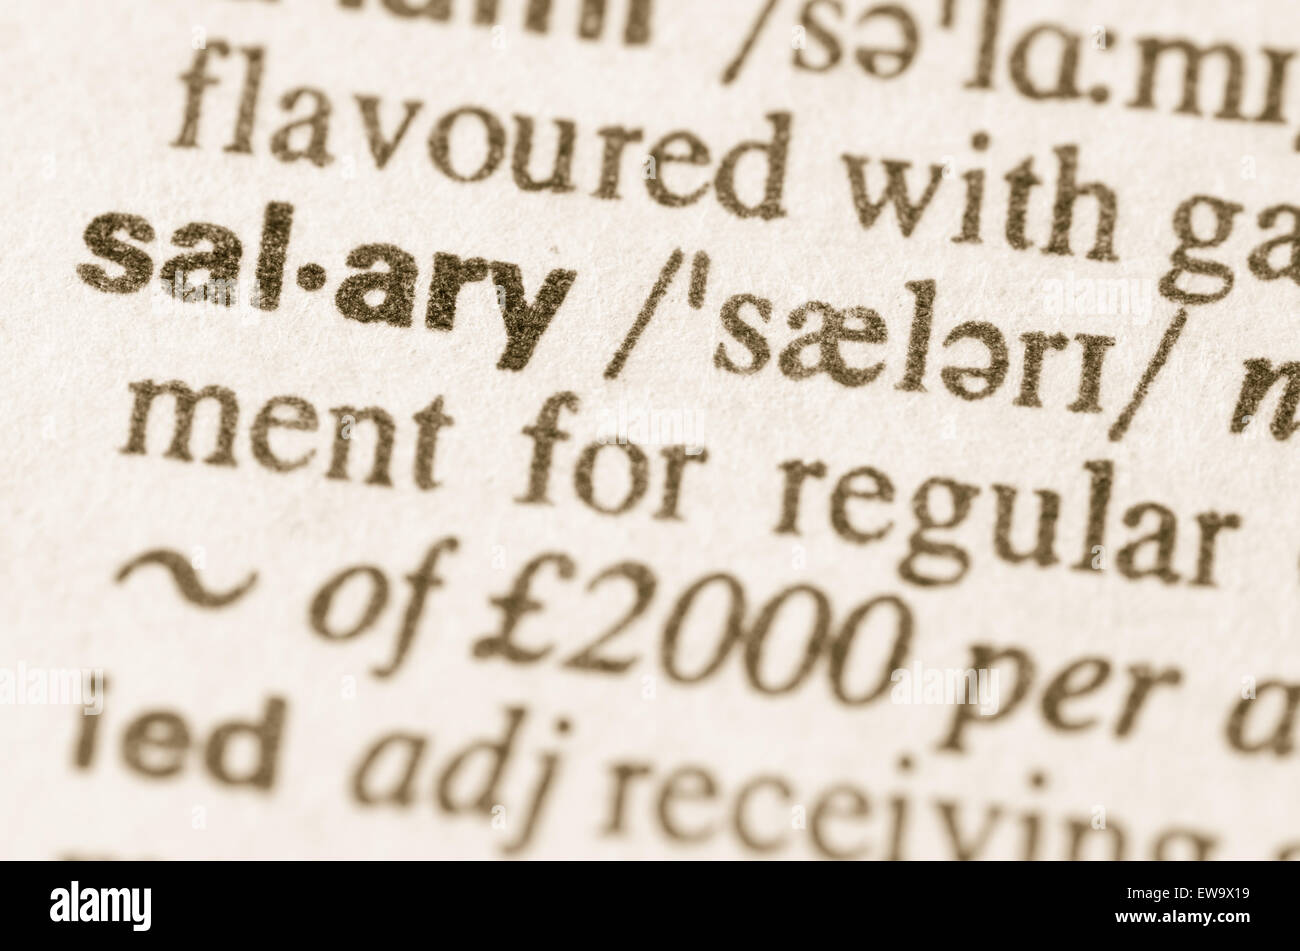 Definition of word salary in dictionary Stock Photo